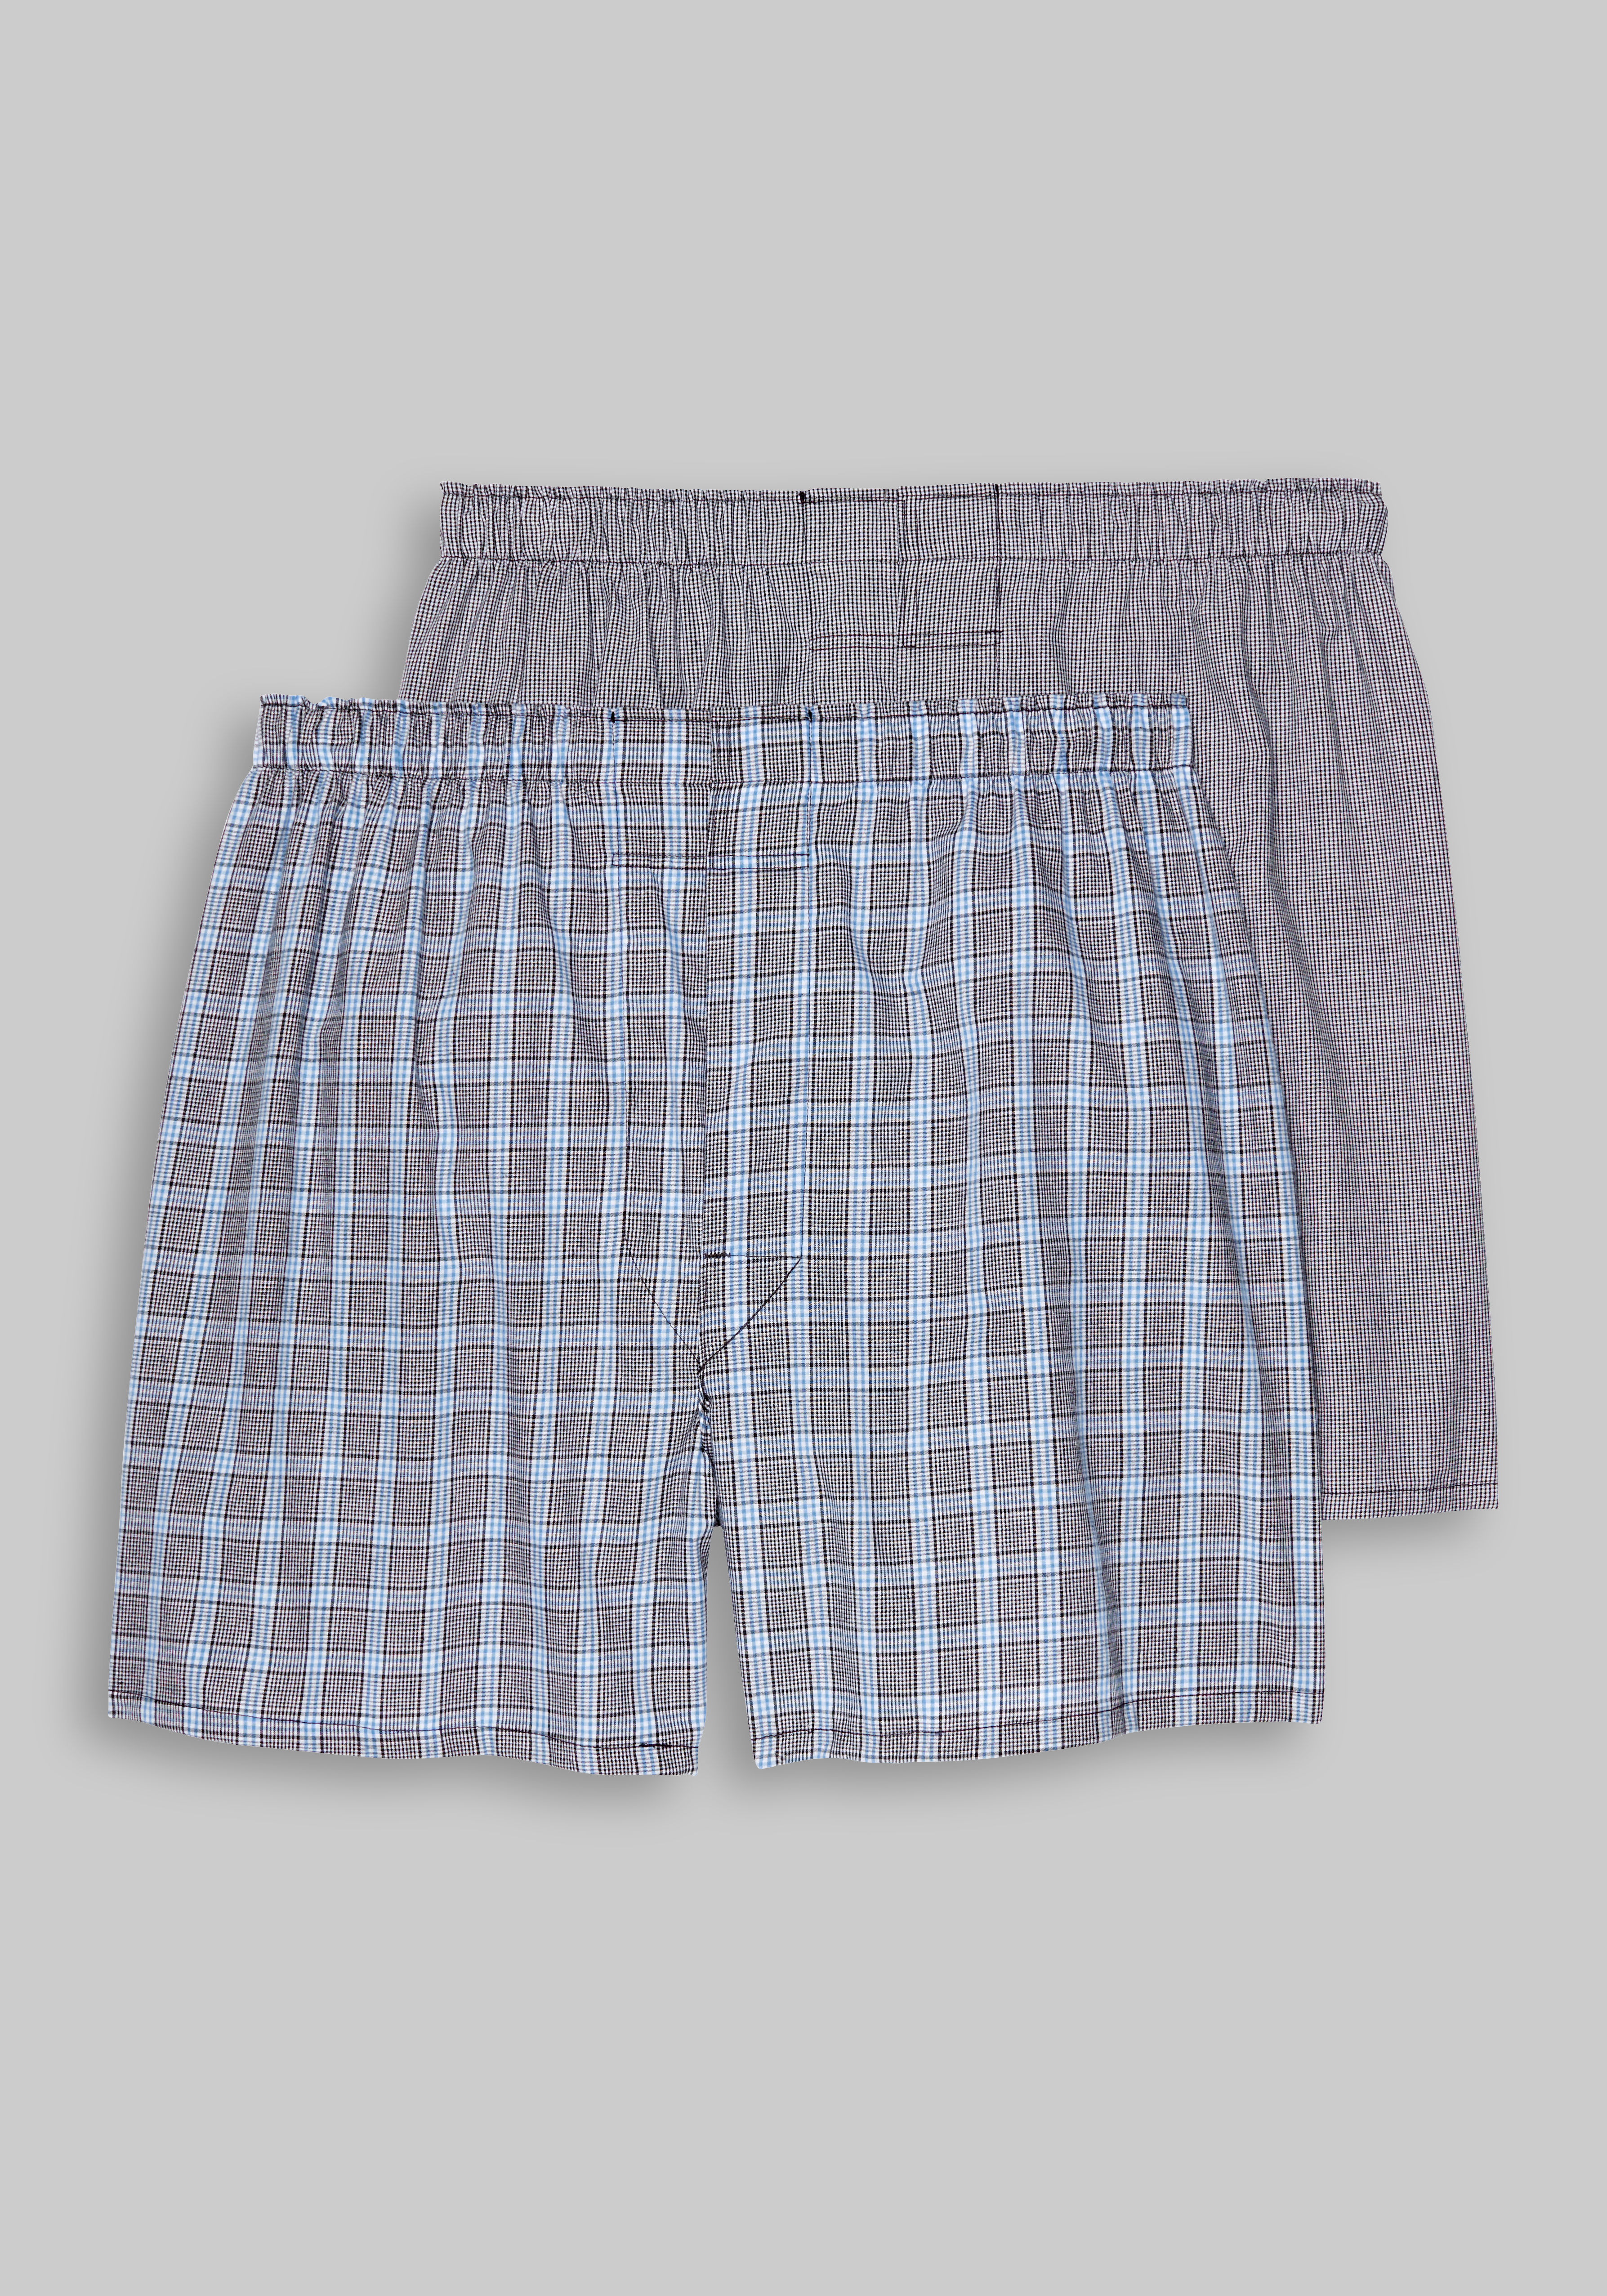 Men's 2 Pack Woven Boxers from Crew Clothing Company